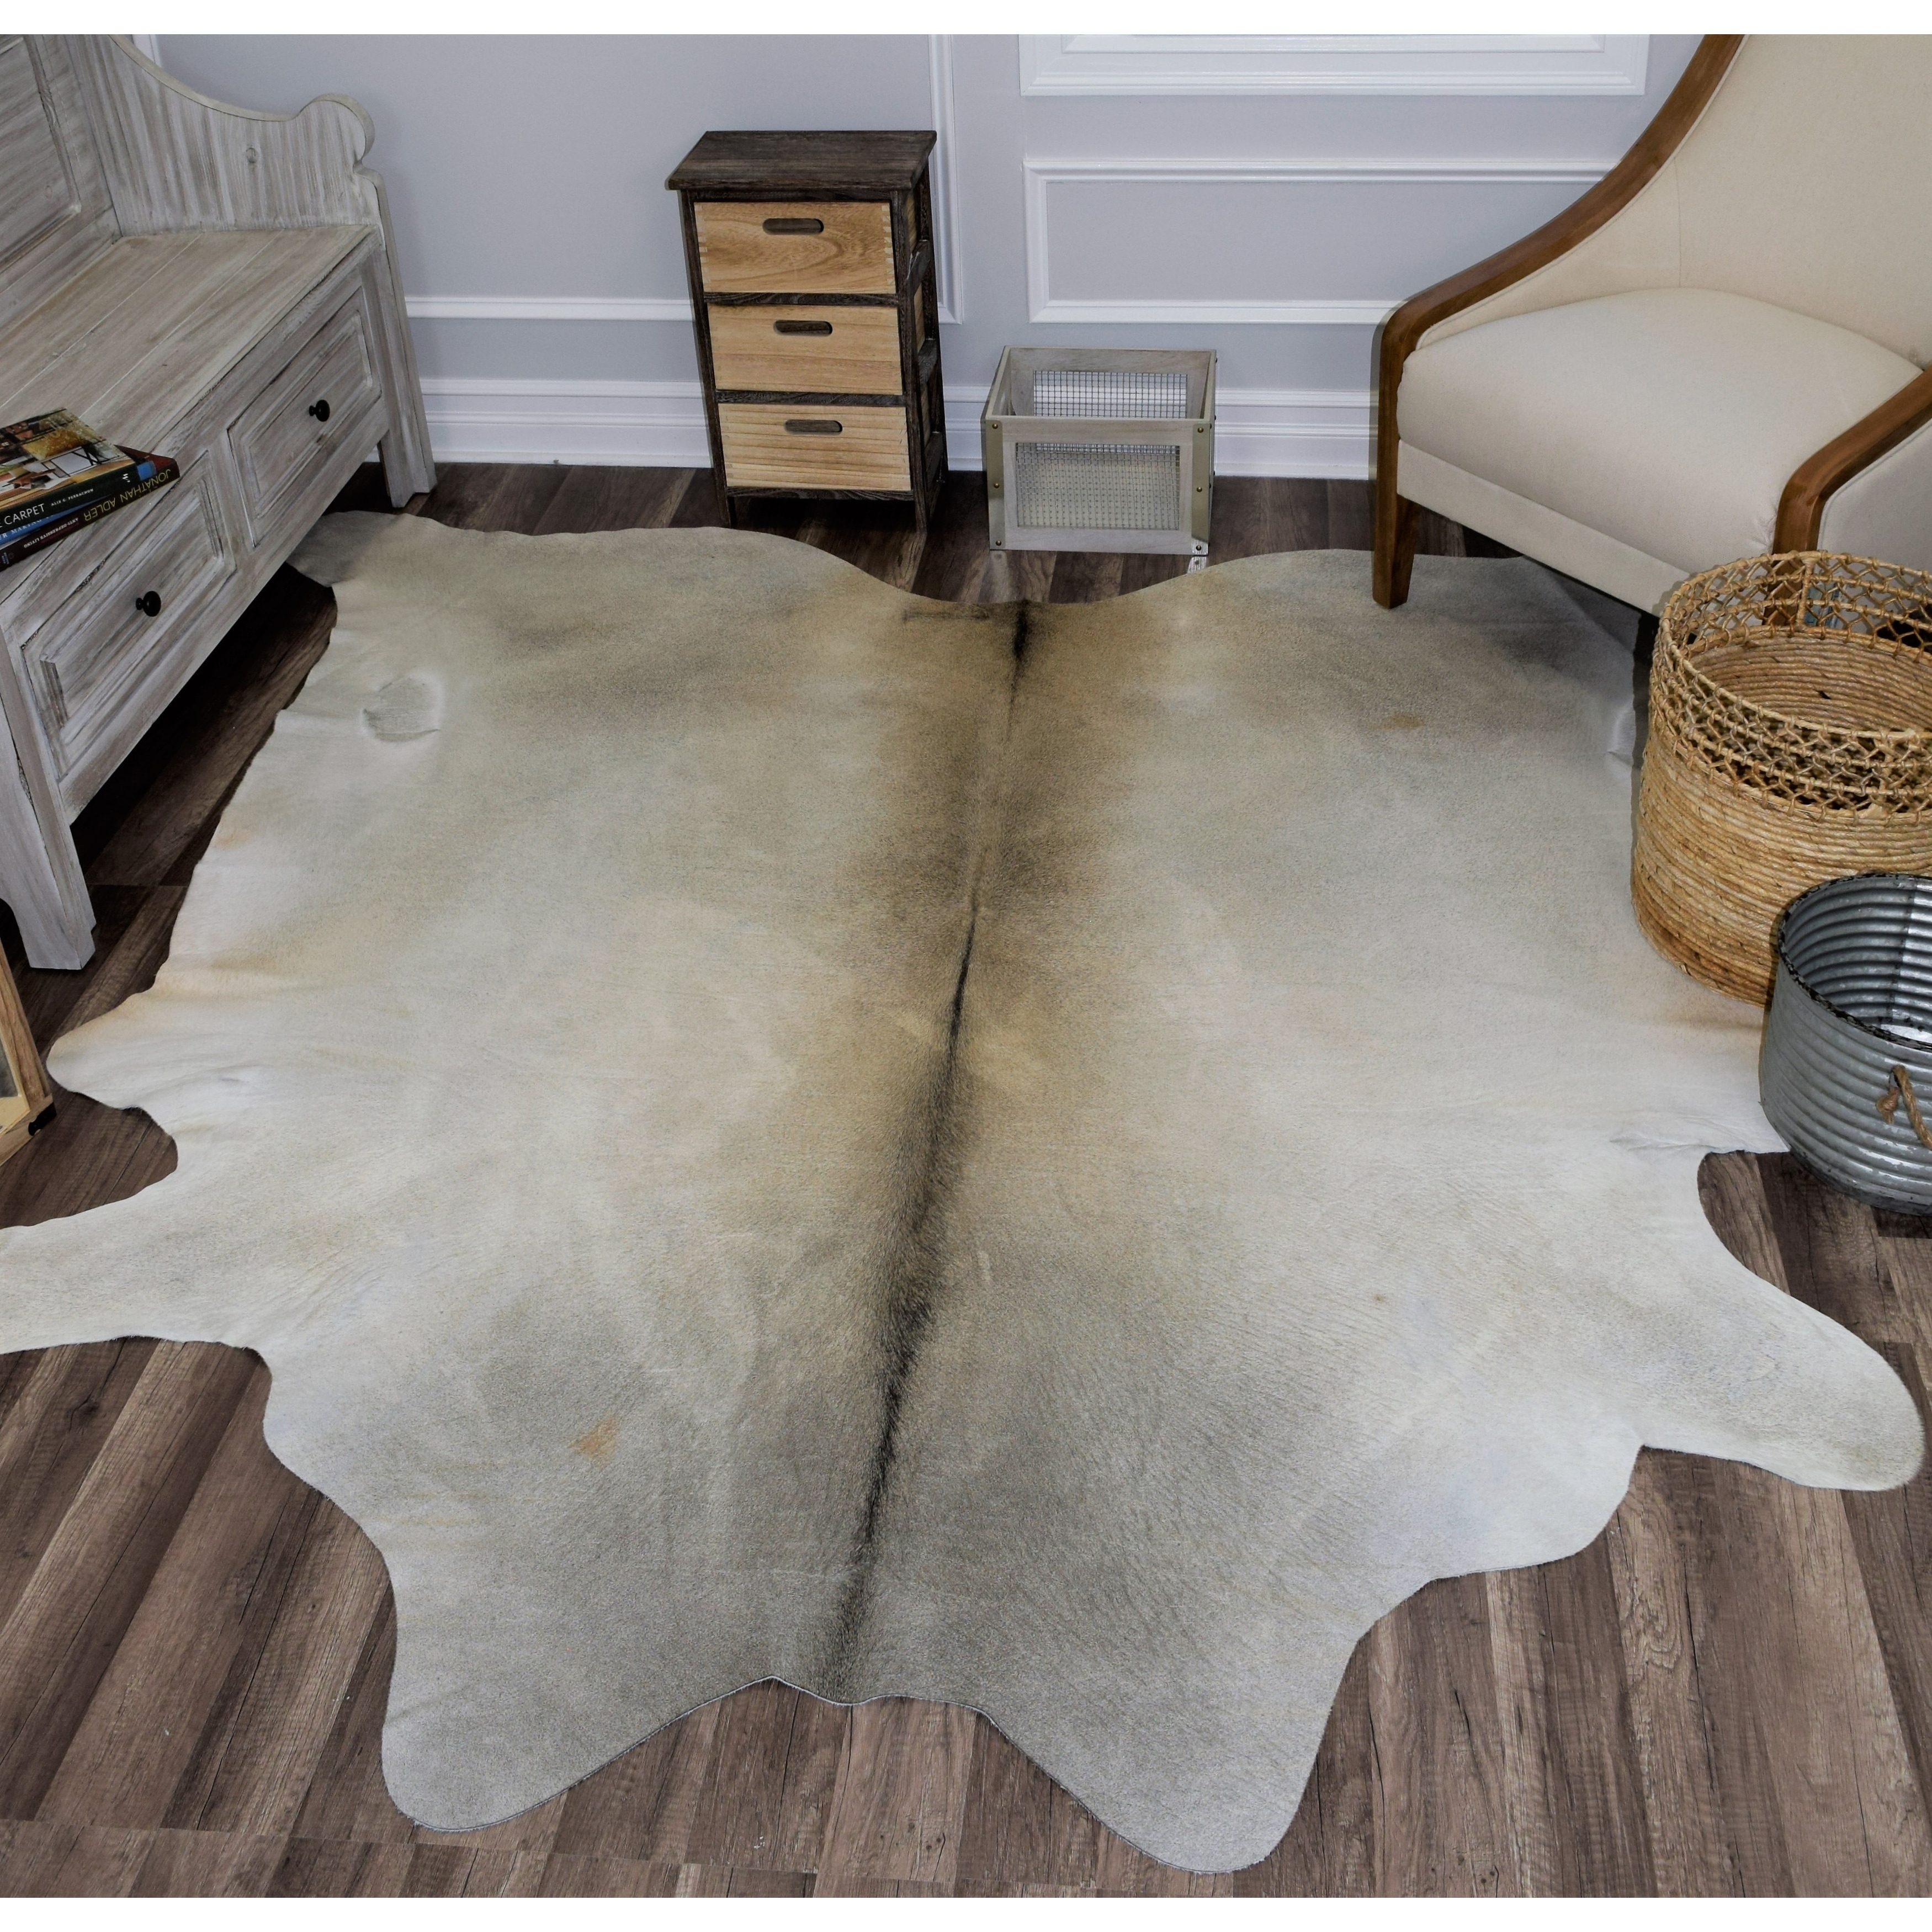 Hides Skins Faux Fur Rugs New Brazilian Cowhide Rug Leather